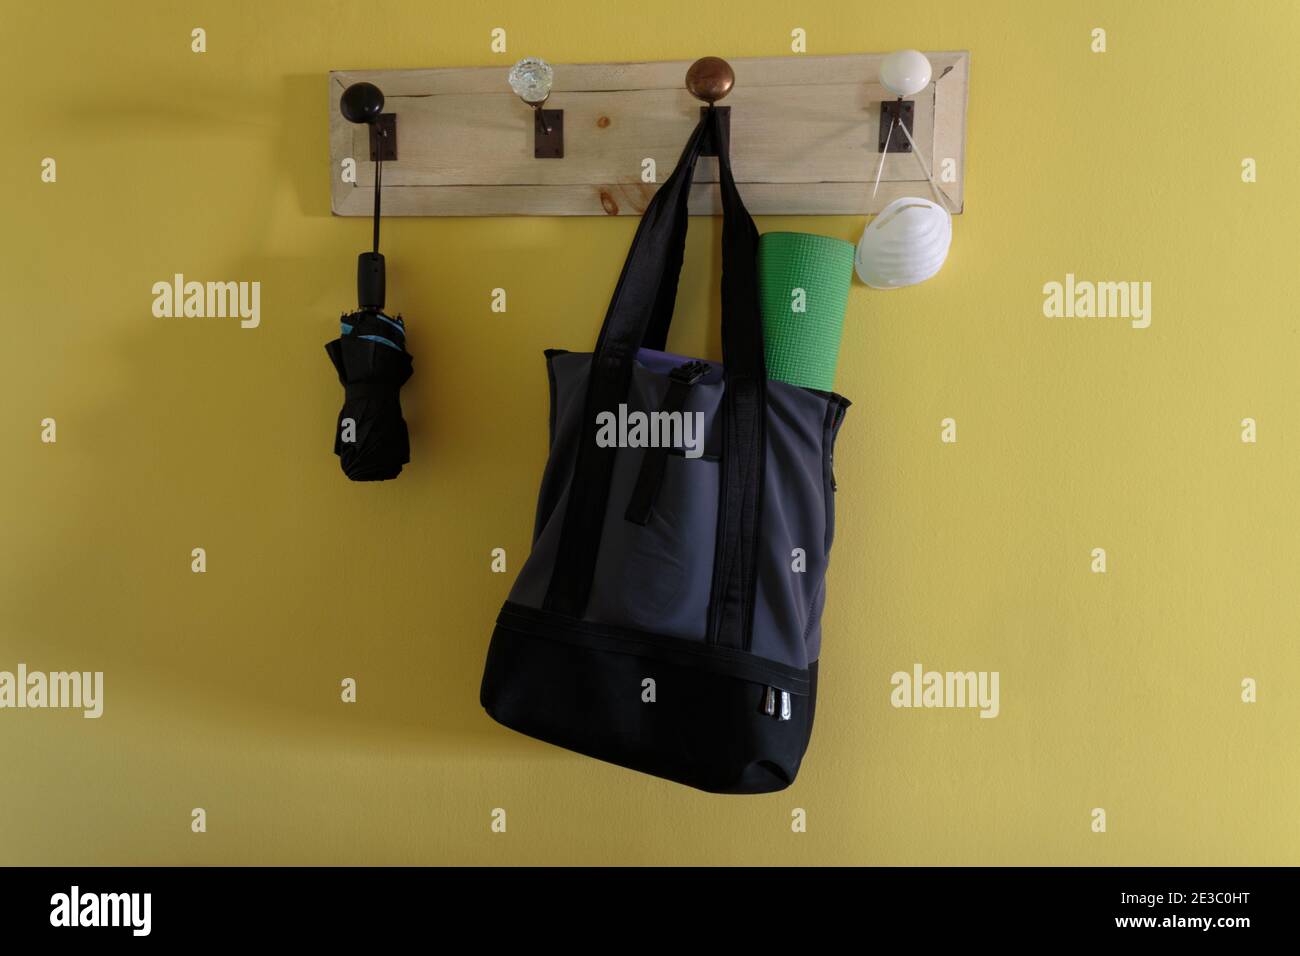 coat rack hanging on a bright yellow wall holding an umbrella, a sports bag with a rolled up yoga mat sticking out and a face mask Stock Photo